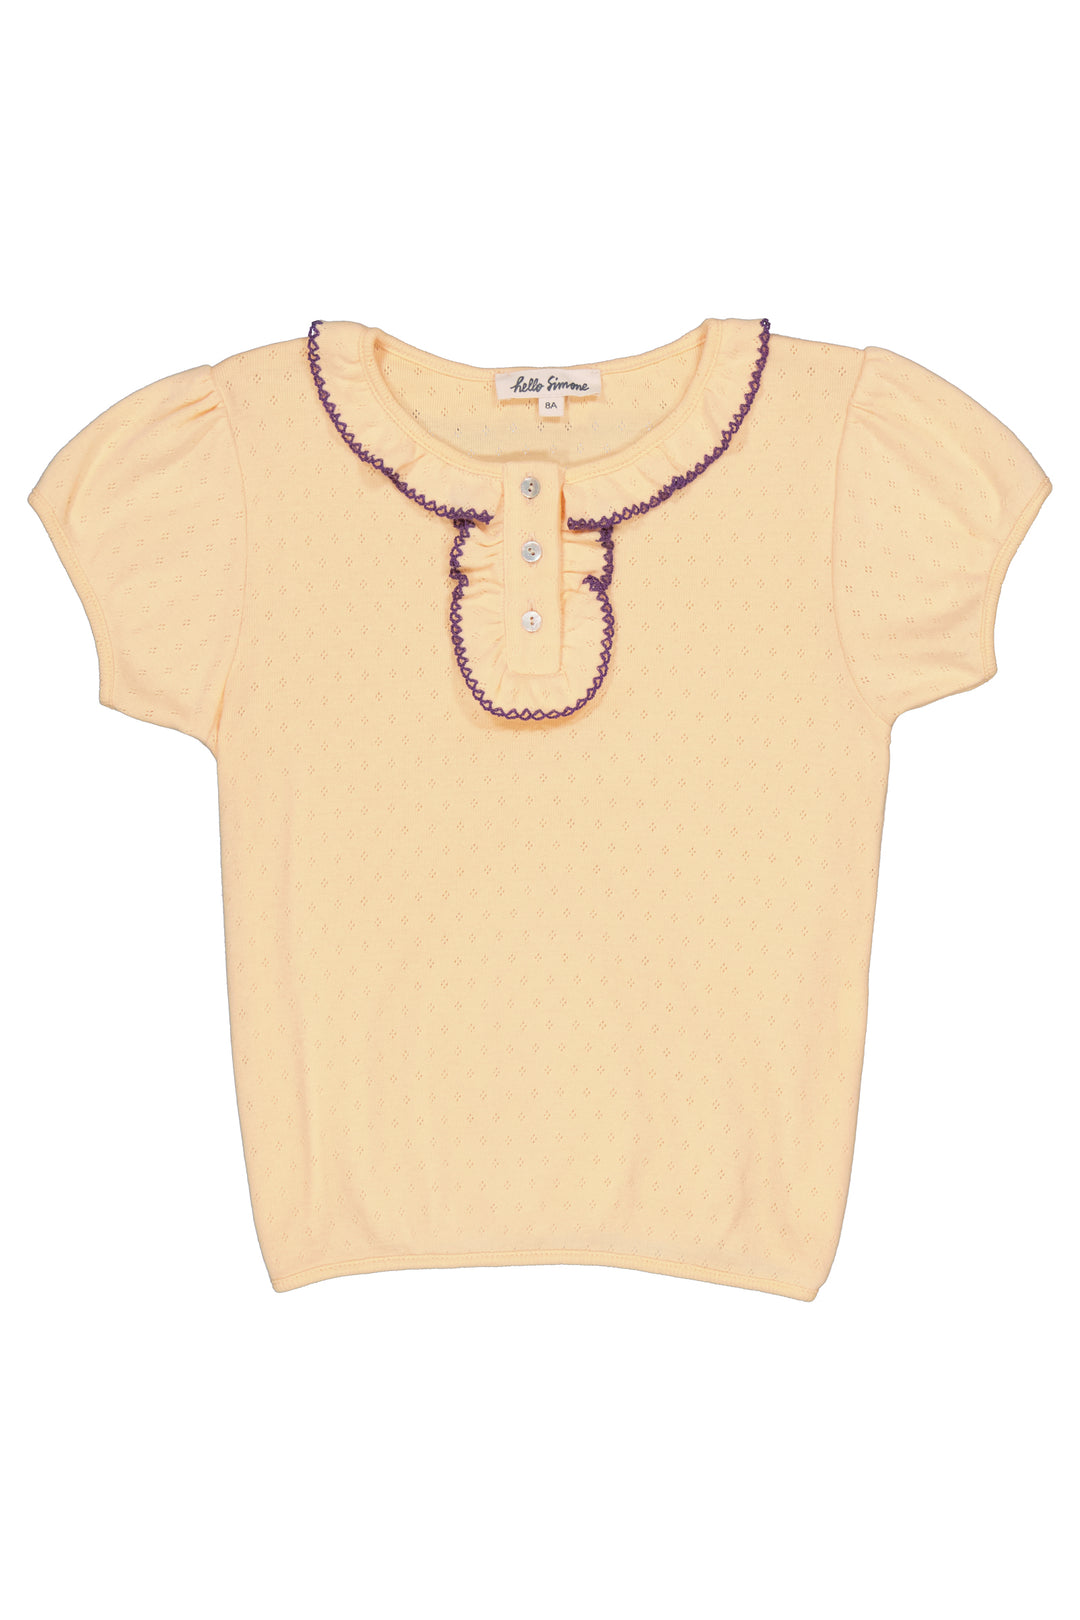 Top Girl Paquerette Apricot Sorbet - قمة